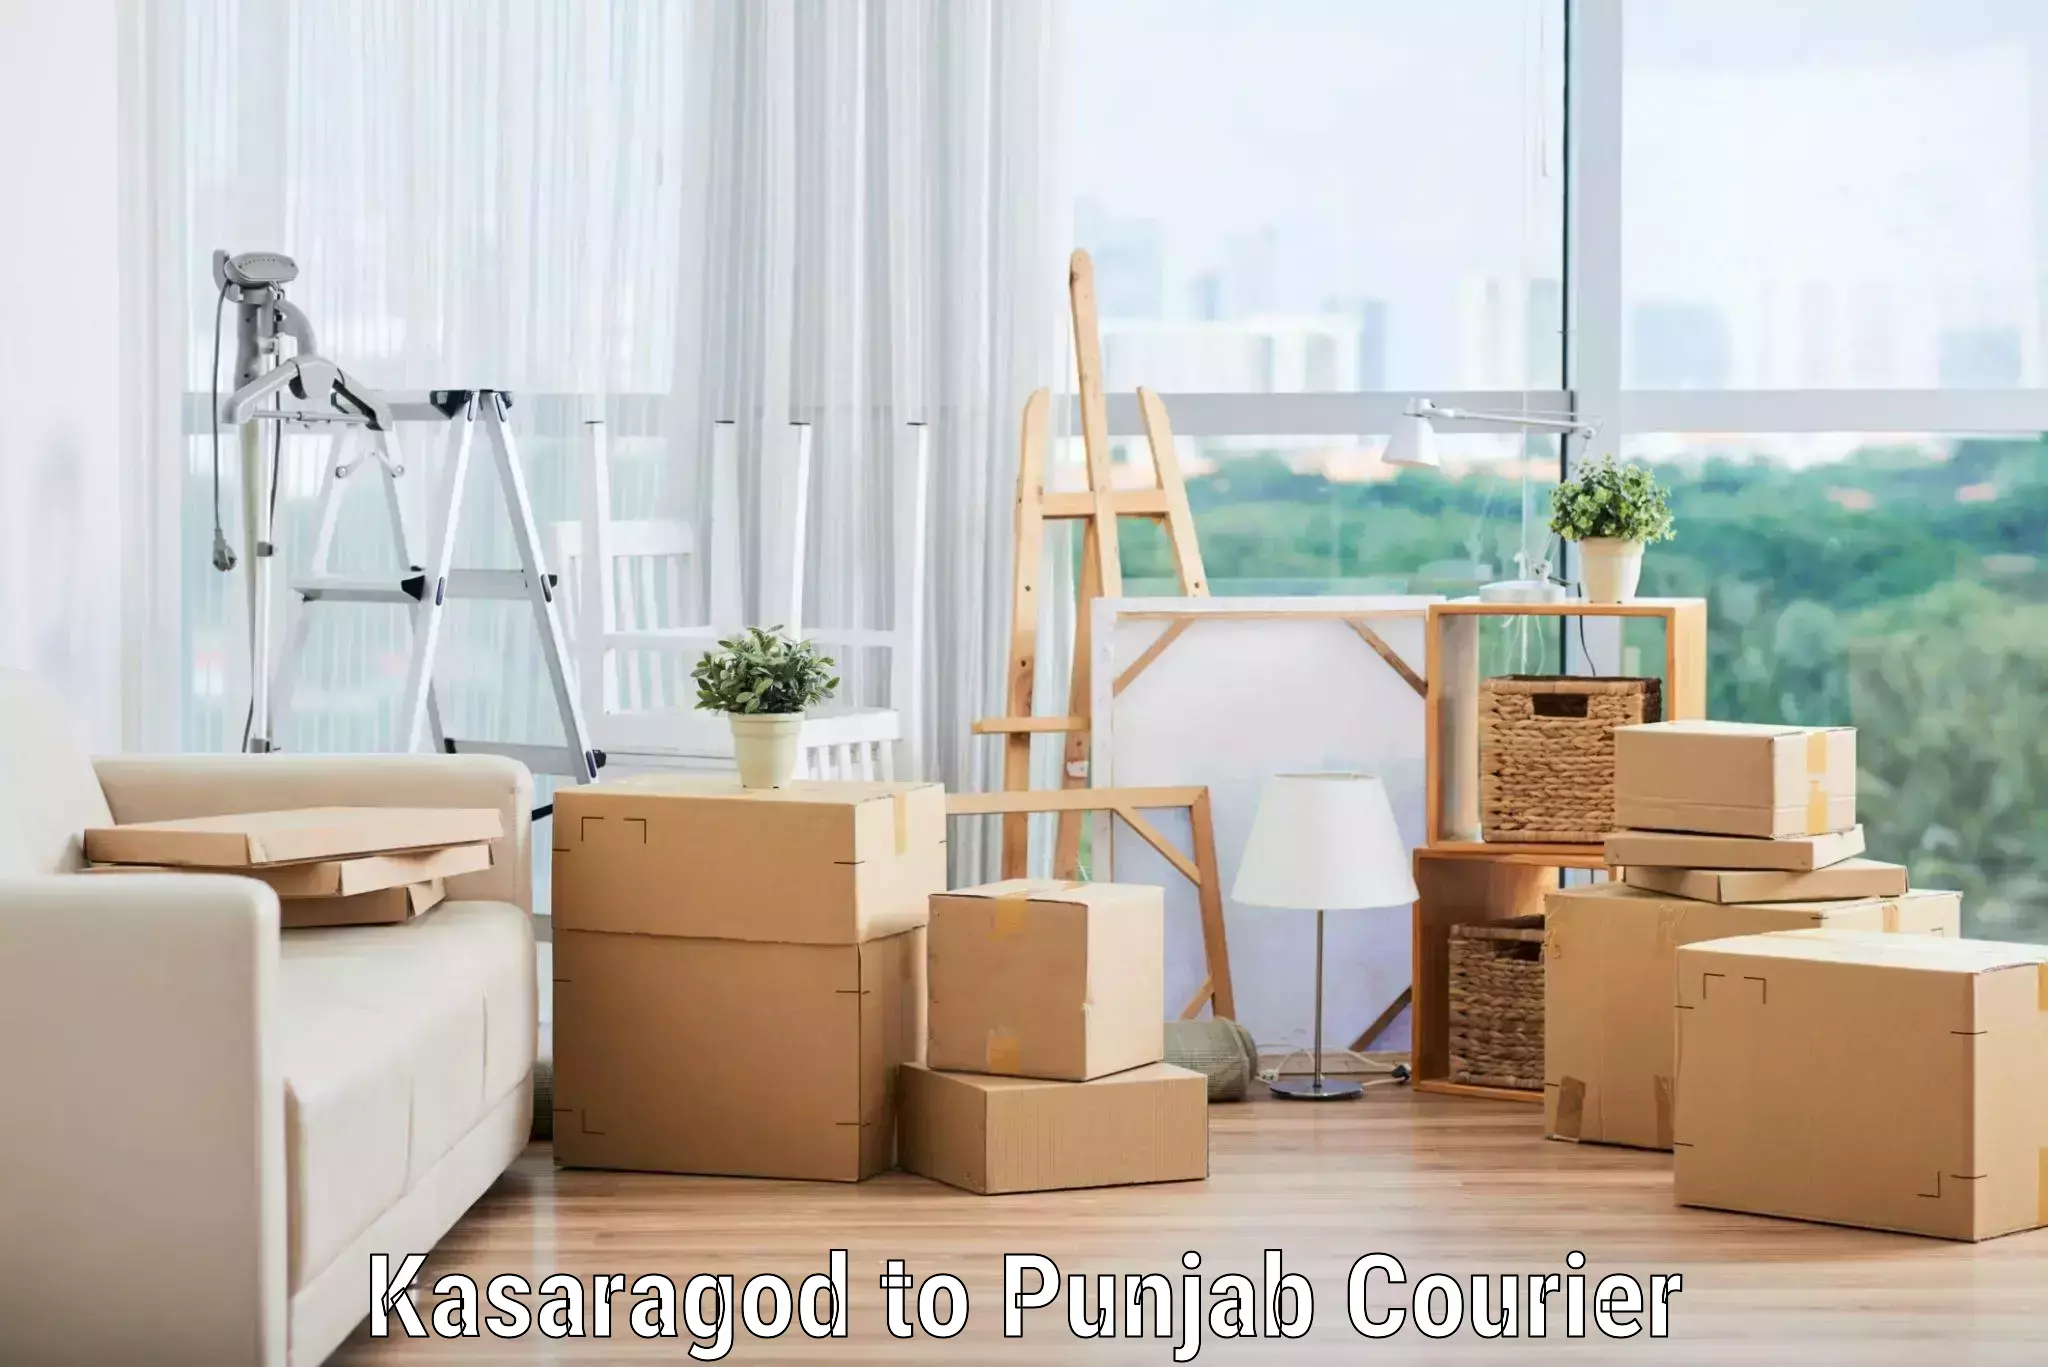 Moving and packing experts Kasaragod to Punjab